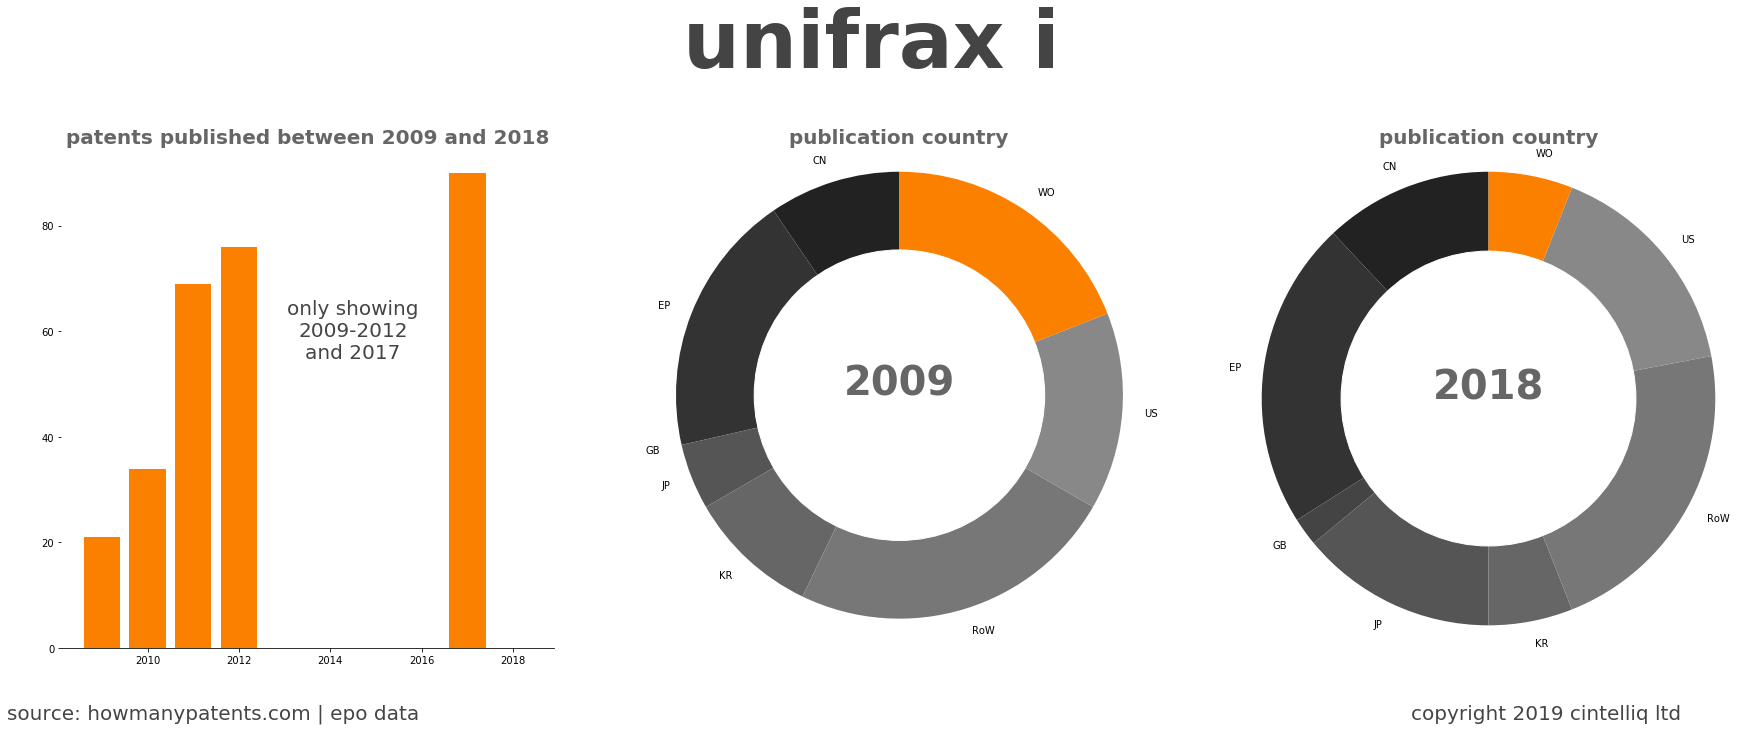 summary of patents for Unifrax I